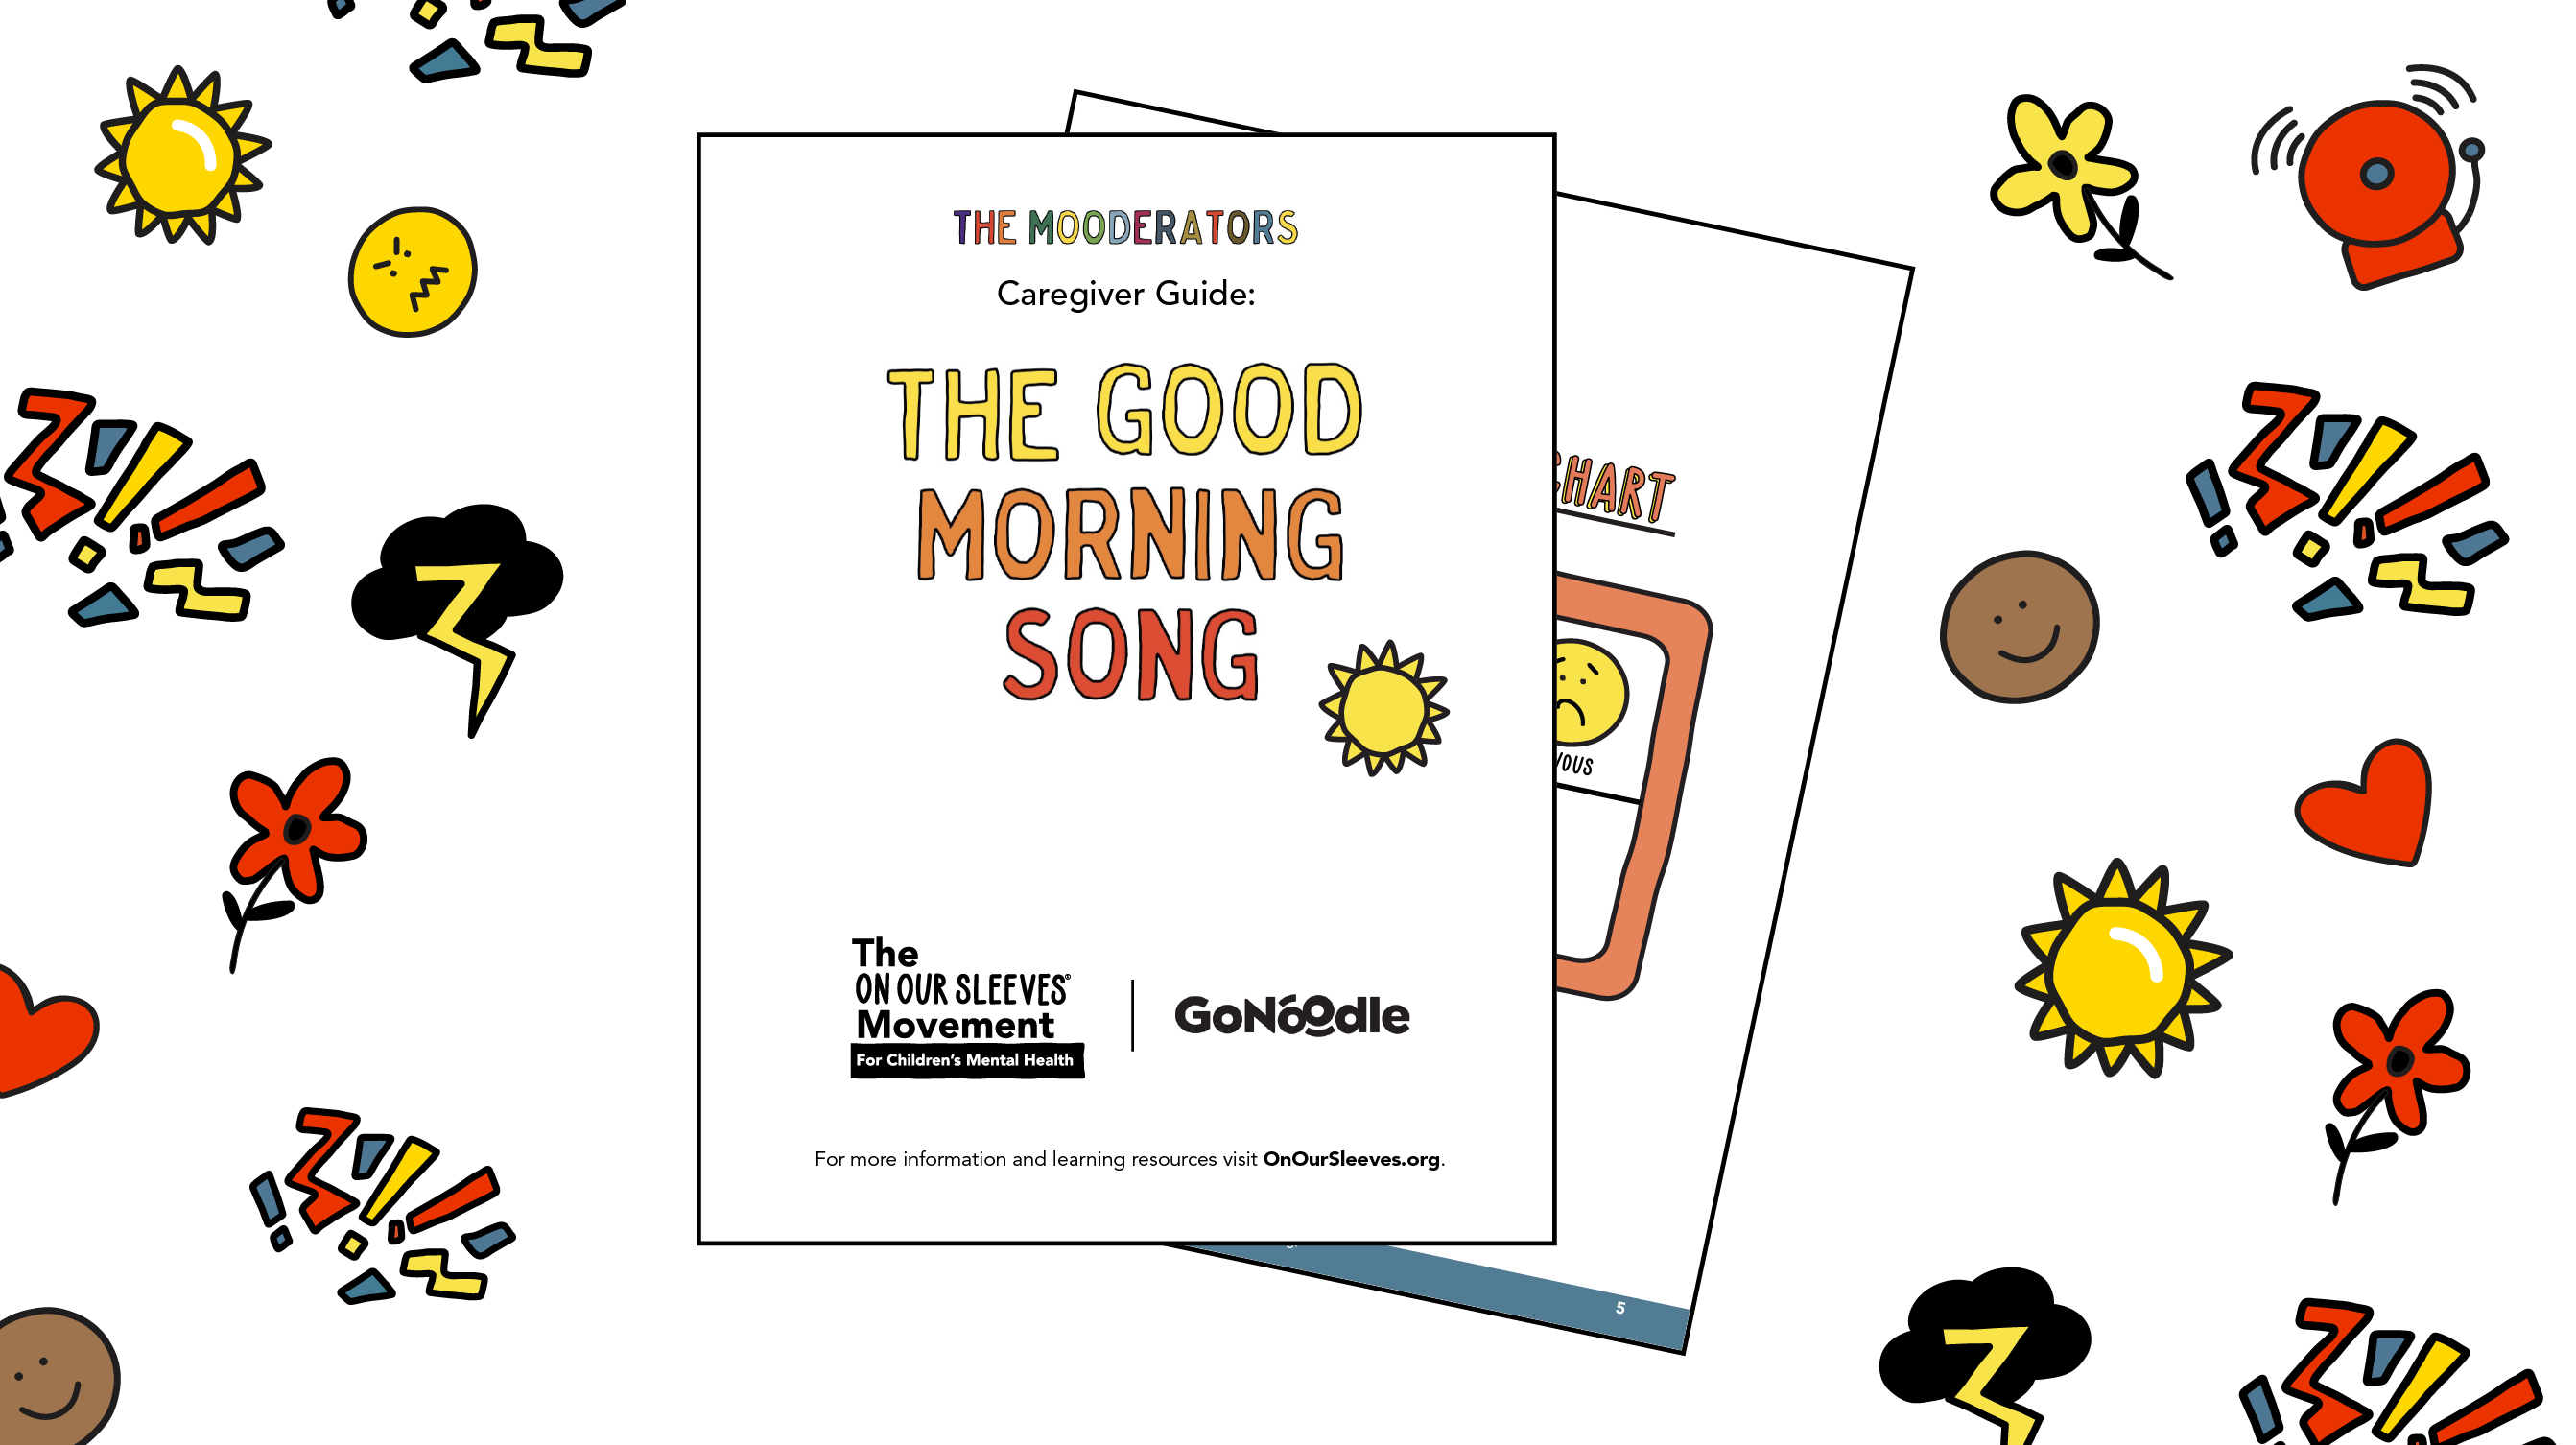 The Good Morning Song: Caregiver Guide